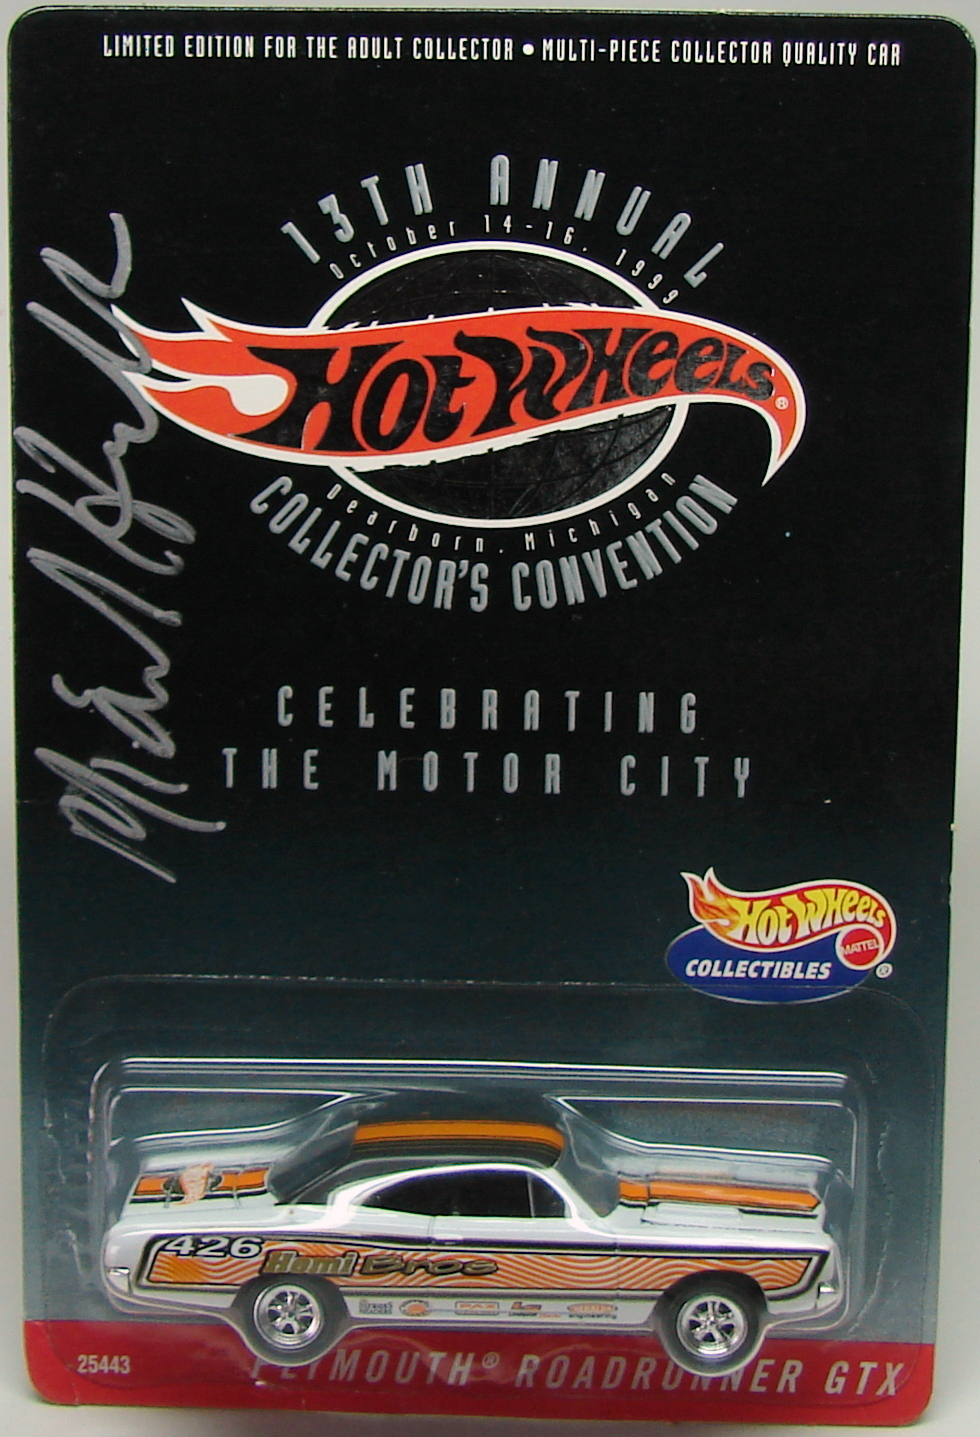 13th Annual Hot Wheels Collectors Convention | Hot Wheels Wiki